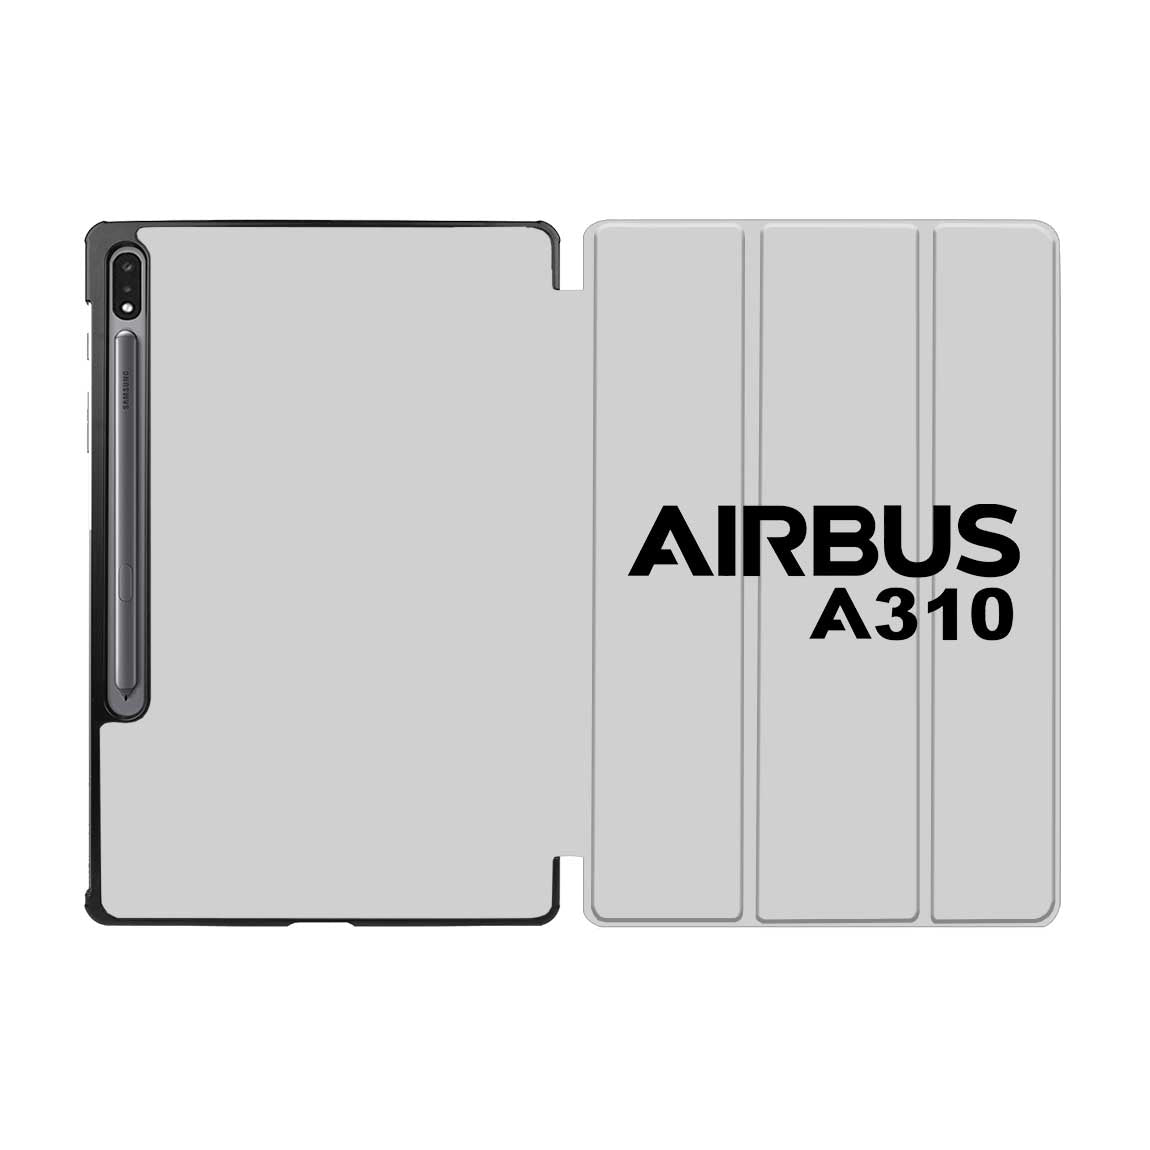 Airbus A310 & Text Designed Samsung Tablet Cases